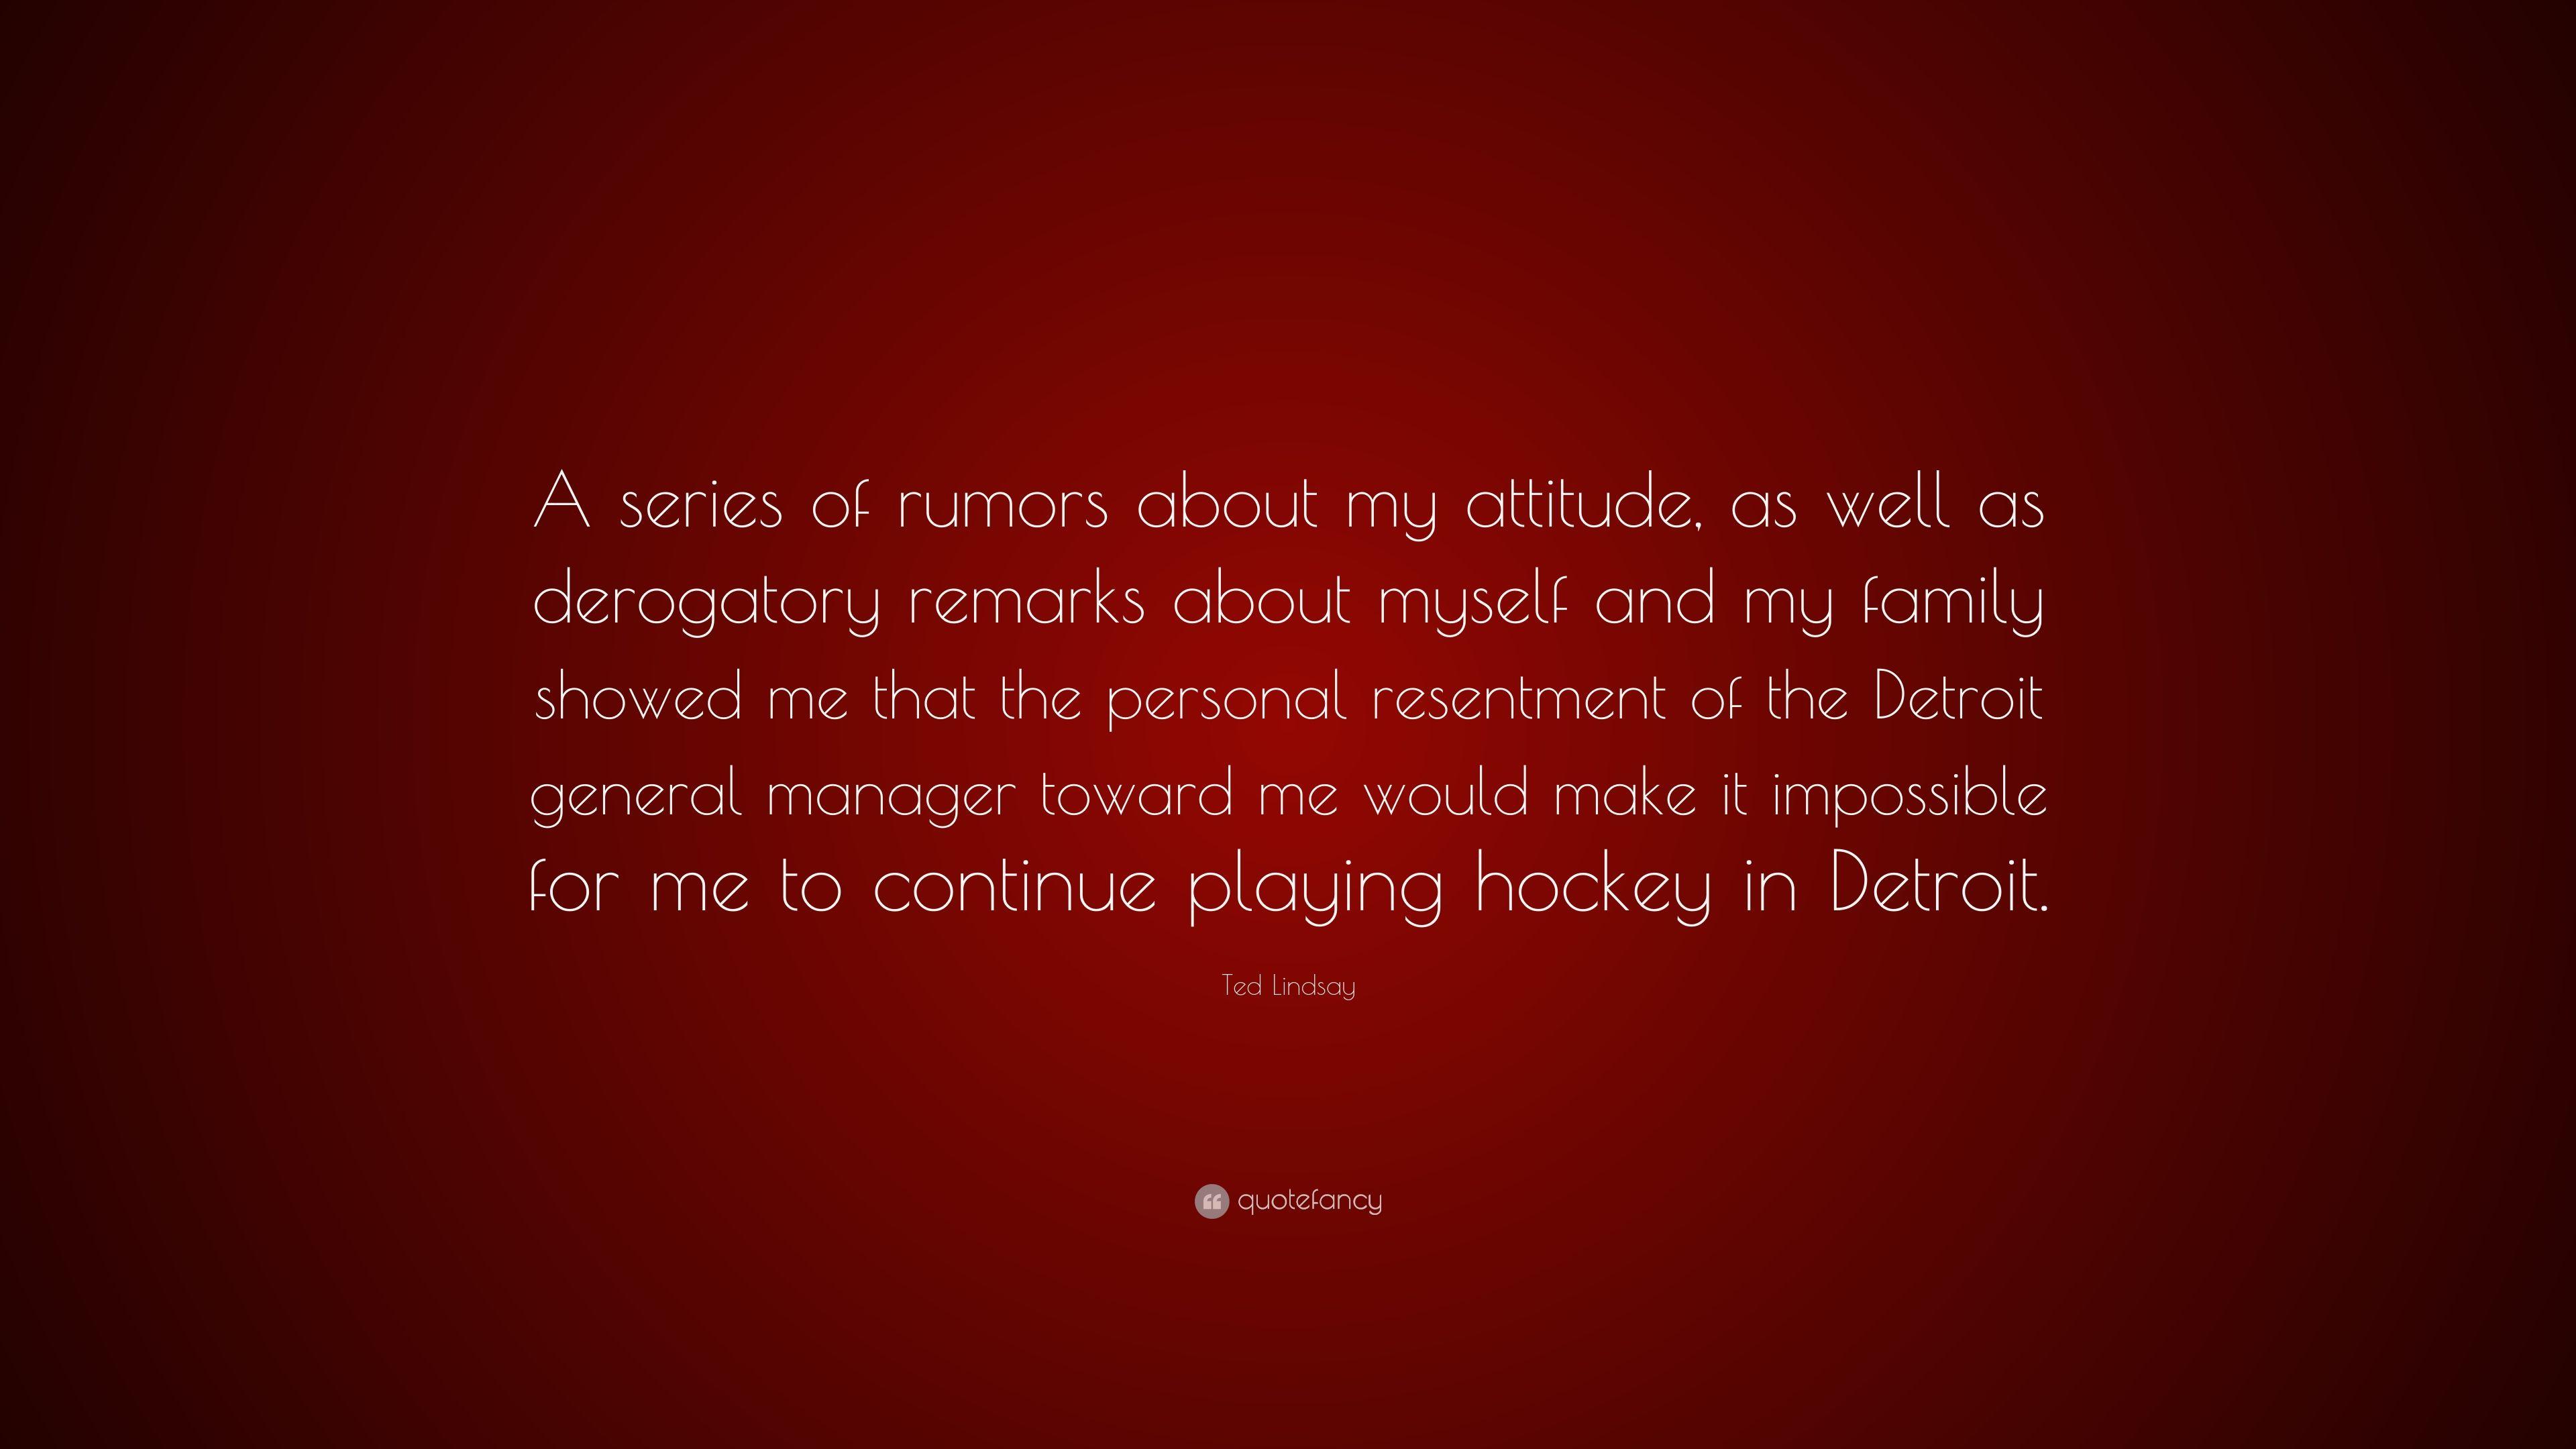 Ted Lindsay Quote: “A series of rumors about my attitude, as well as